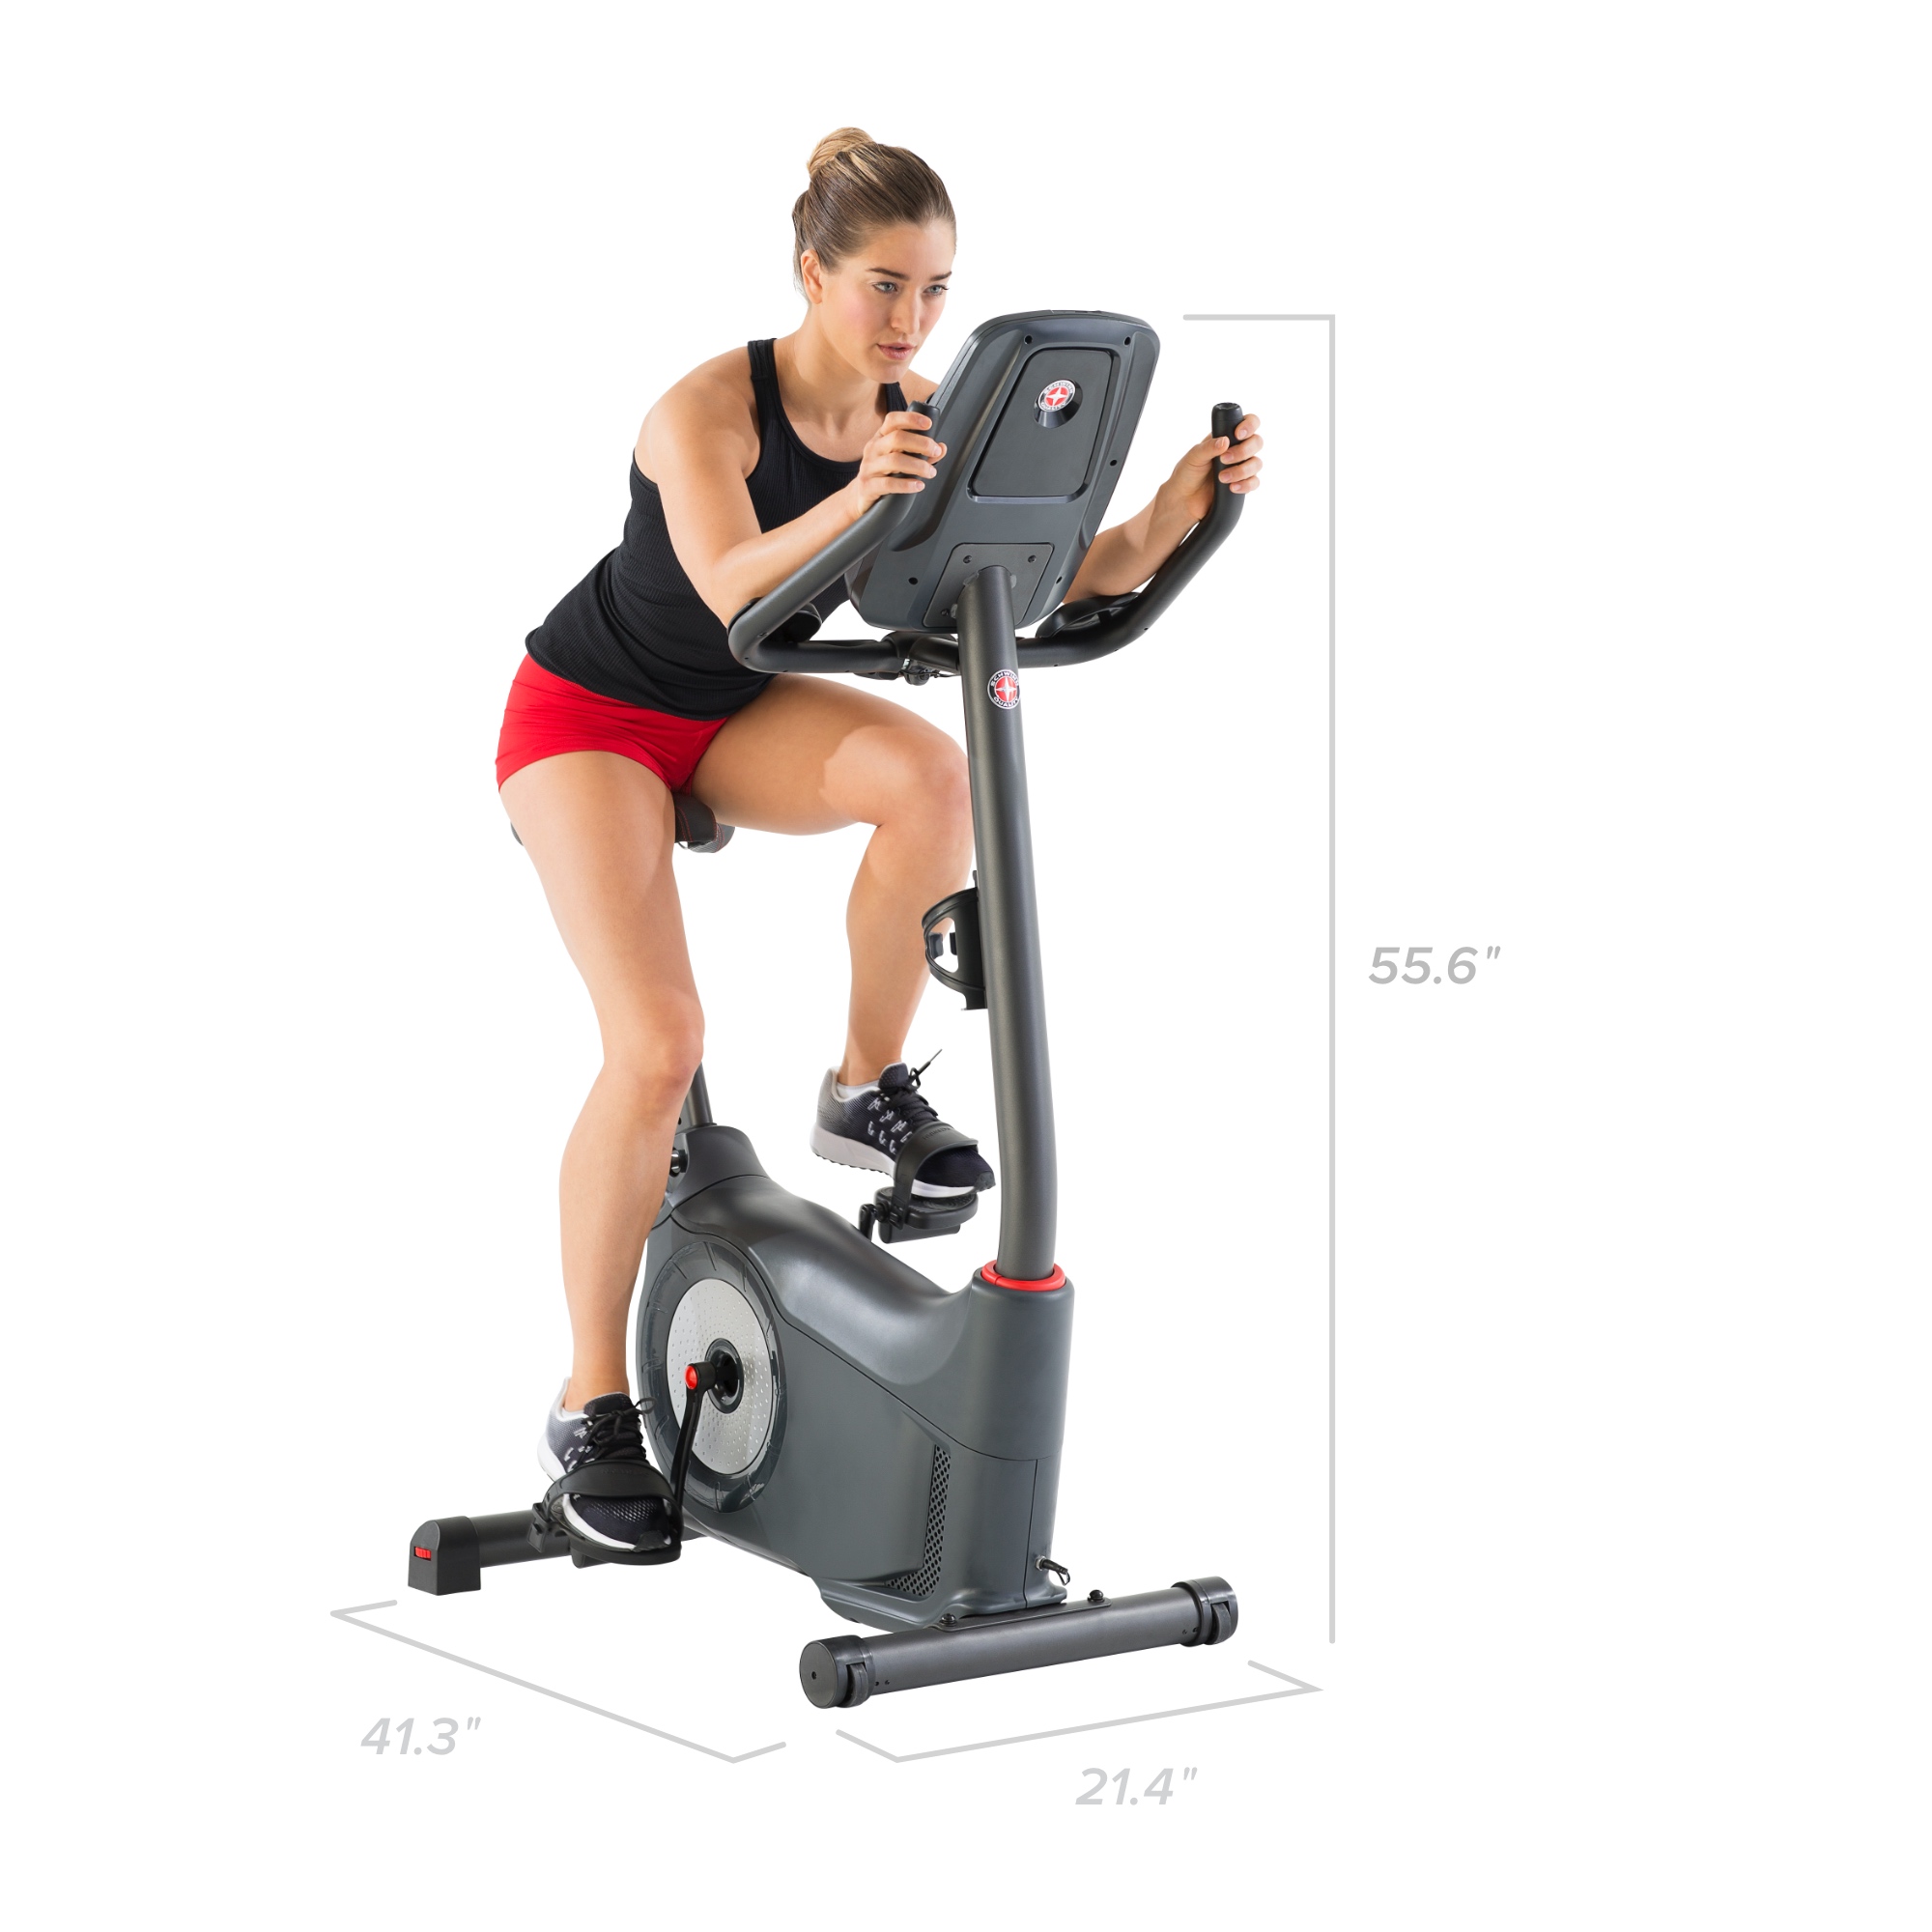 Schwinn Fitness 170 Home Workout Stationary Upright Exercise Bike w/ Explore the World Compatibility - image 13 of 14